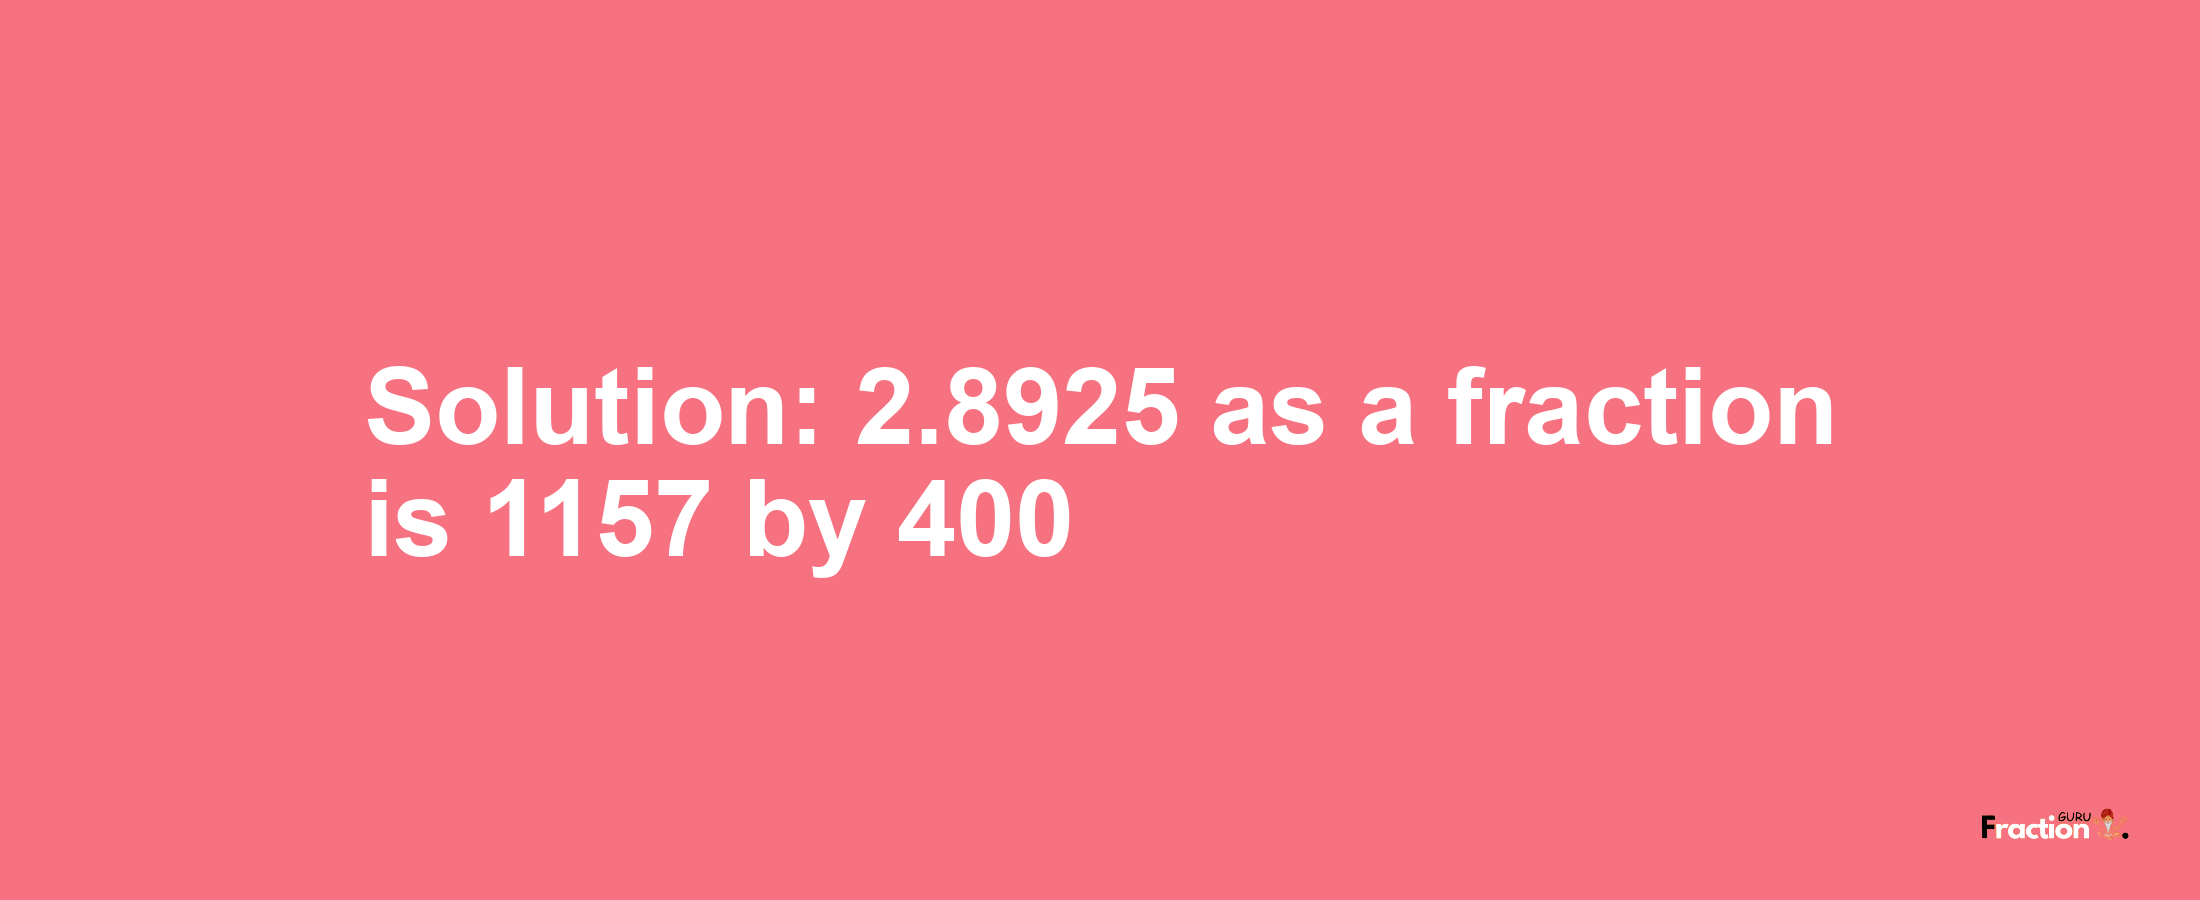 Solution:2.8925 as a fraction is 1157/400